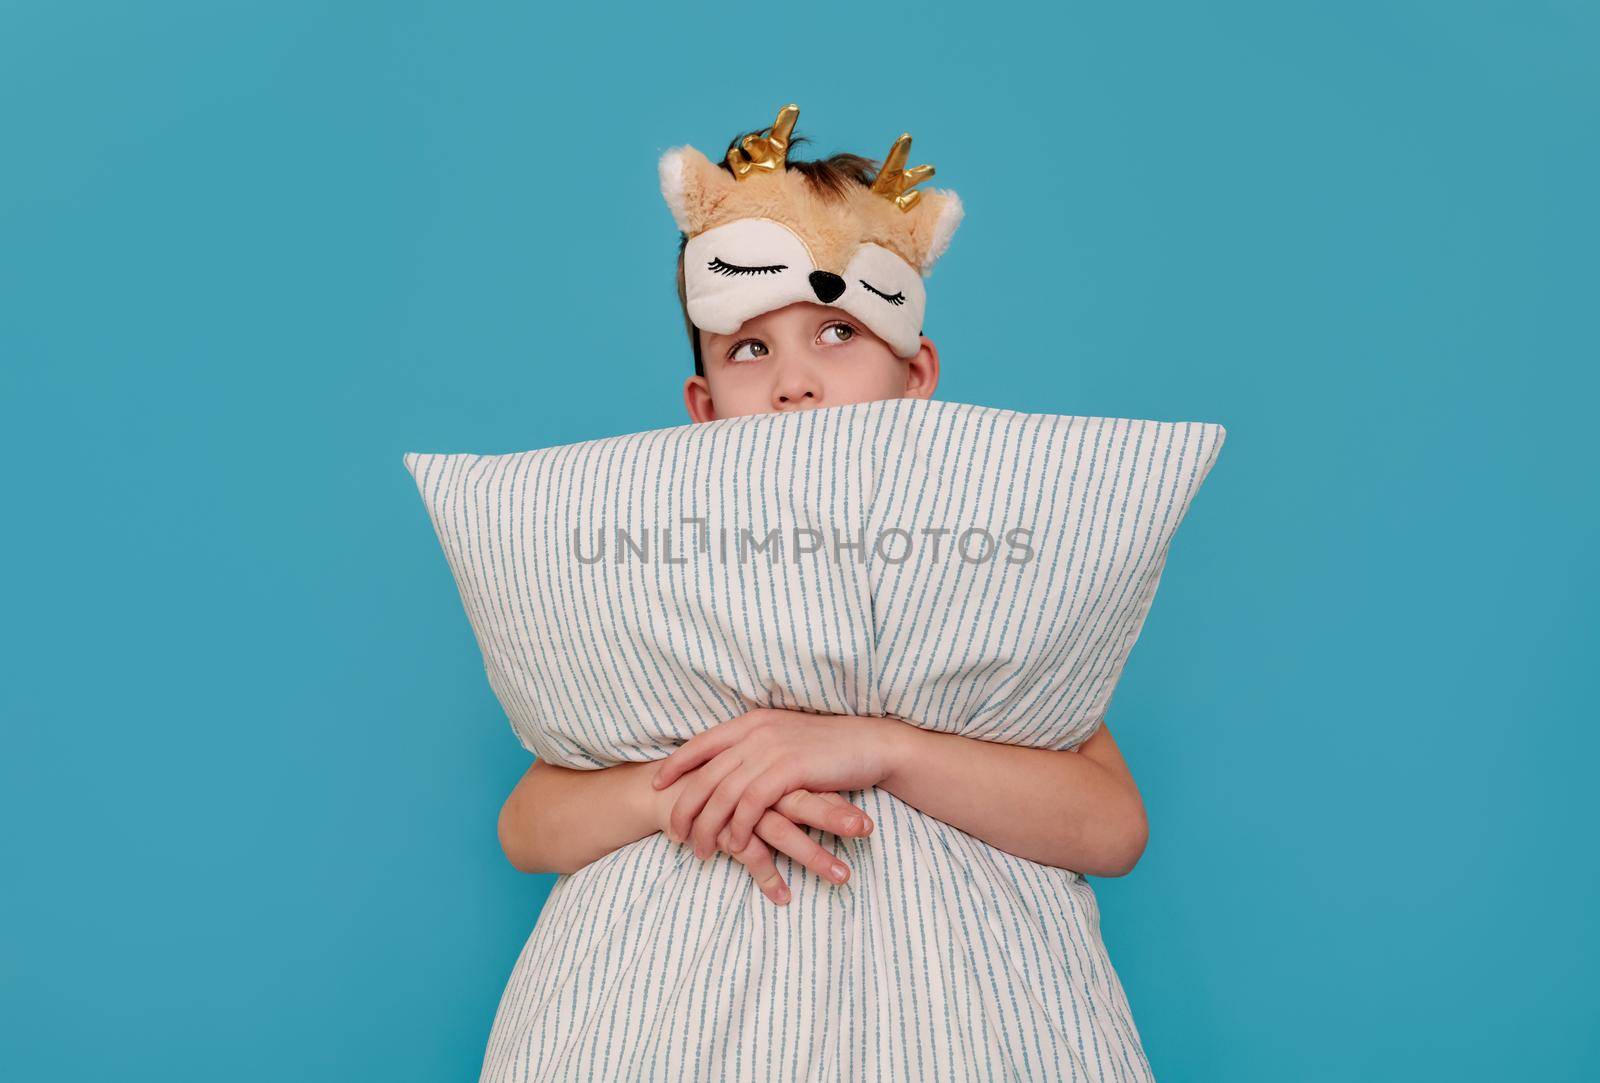 the cunning boy does not want to sleep, hugs the pillow and looks away. Child on a blue background with copy space. The concept of a naughty child, parenting, insomnia, health